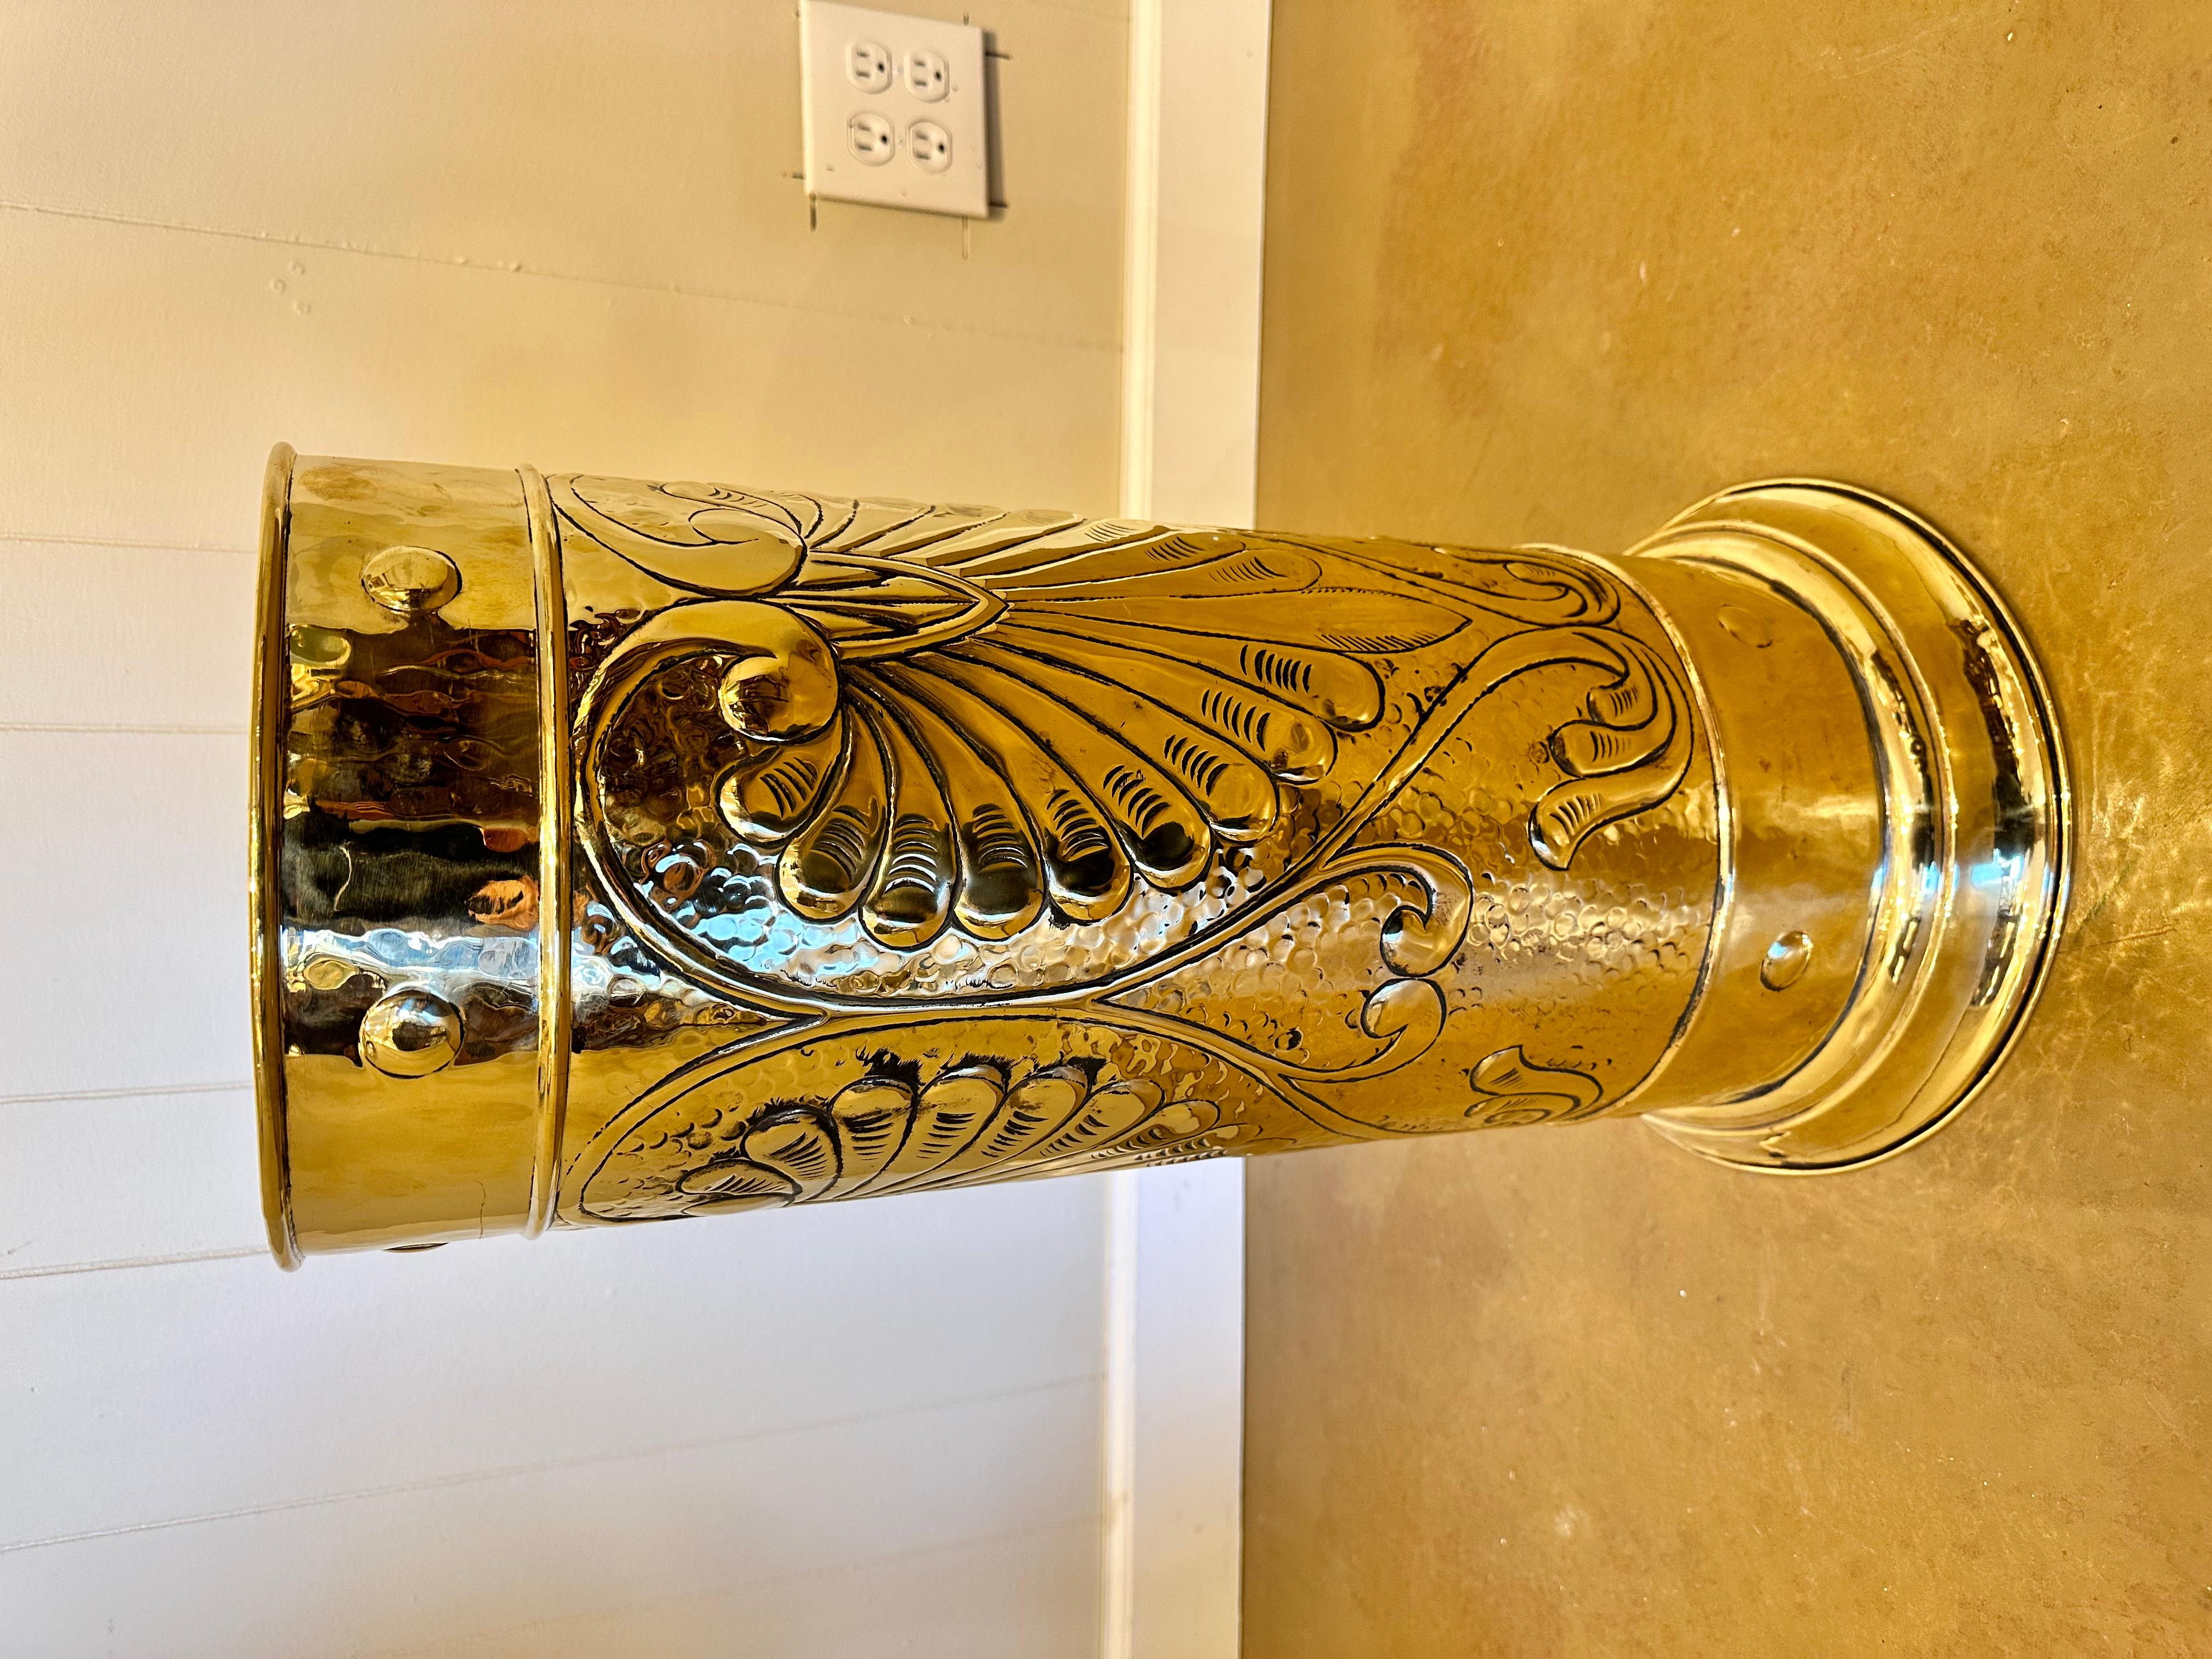 This is a gorgeous English umbrella stand. The brass is in excellent condition and shines beautifully, while also boasting its antiquity in with a lovely patina. The design is slightly raised adding ornamentation as well as texture to this piece.